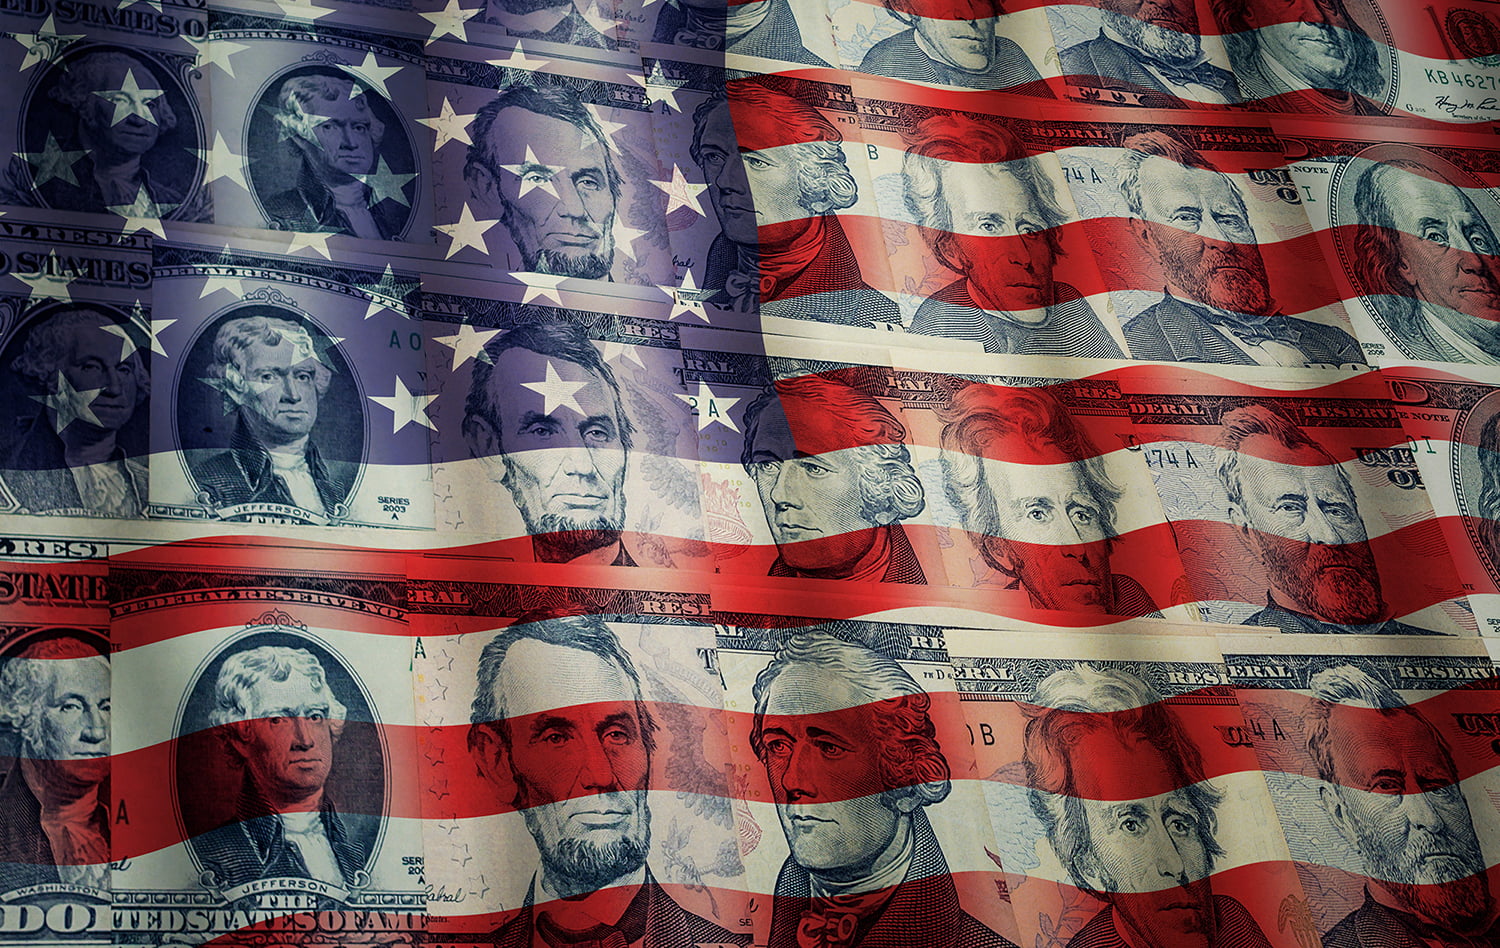 America’s Presidents on twisted banknotes money with America flag is background